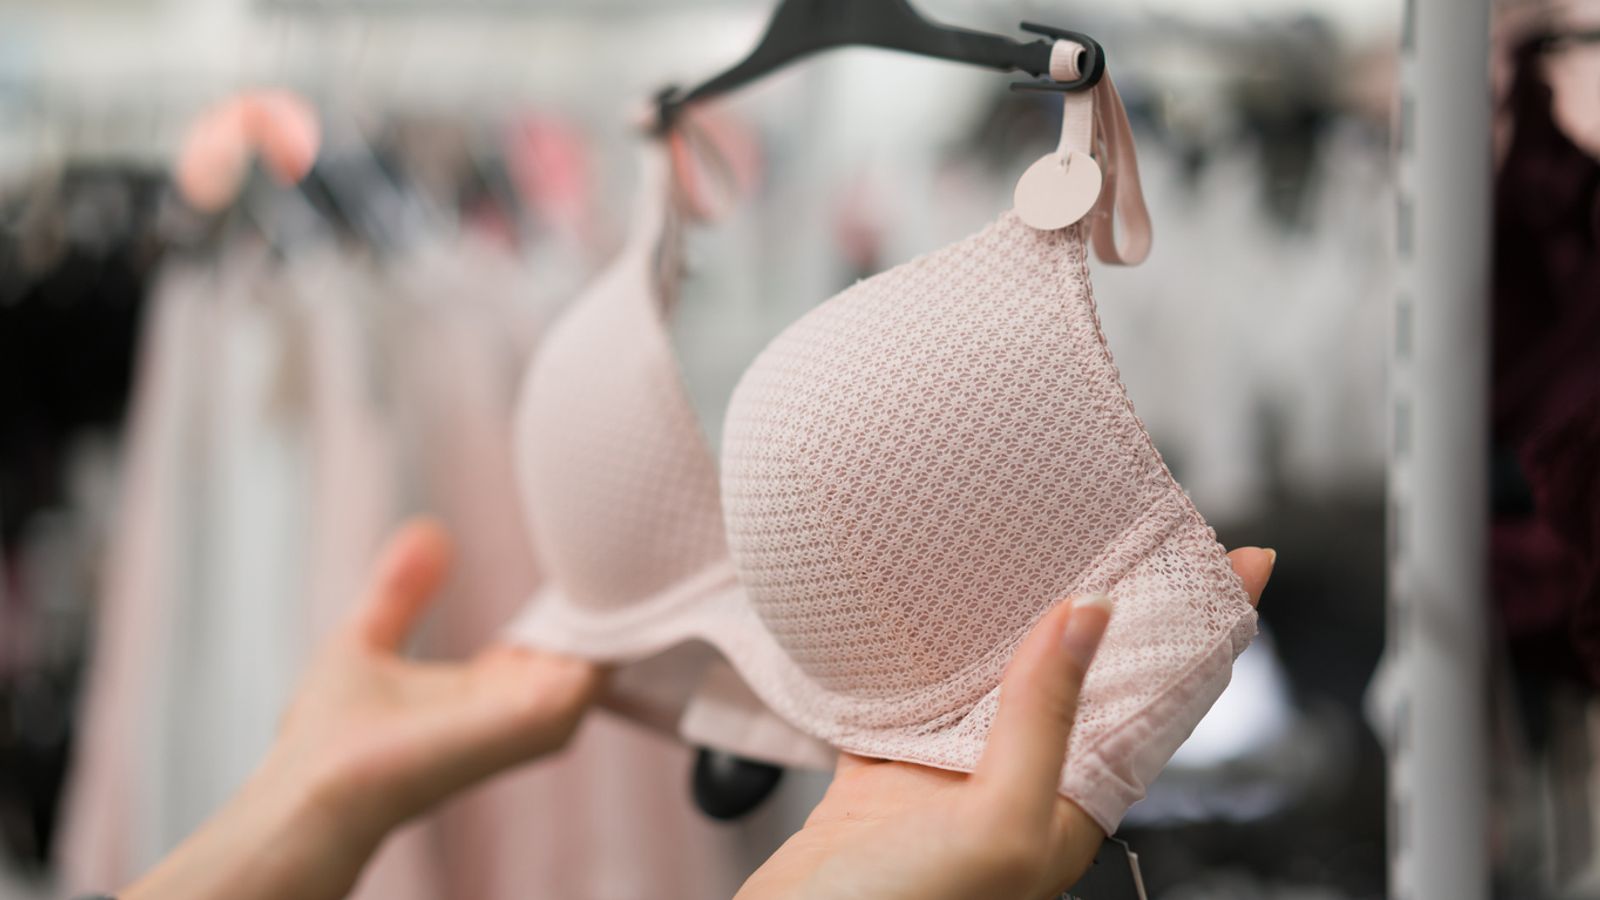 Bras are a basic necessity that should be exempt from VAT, radiographers say